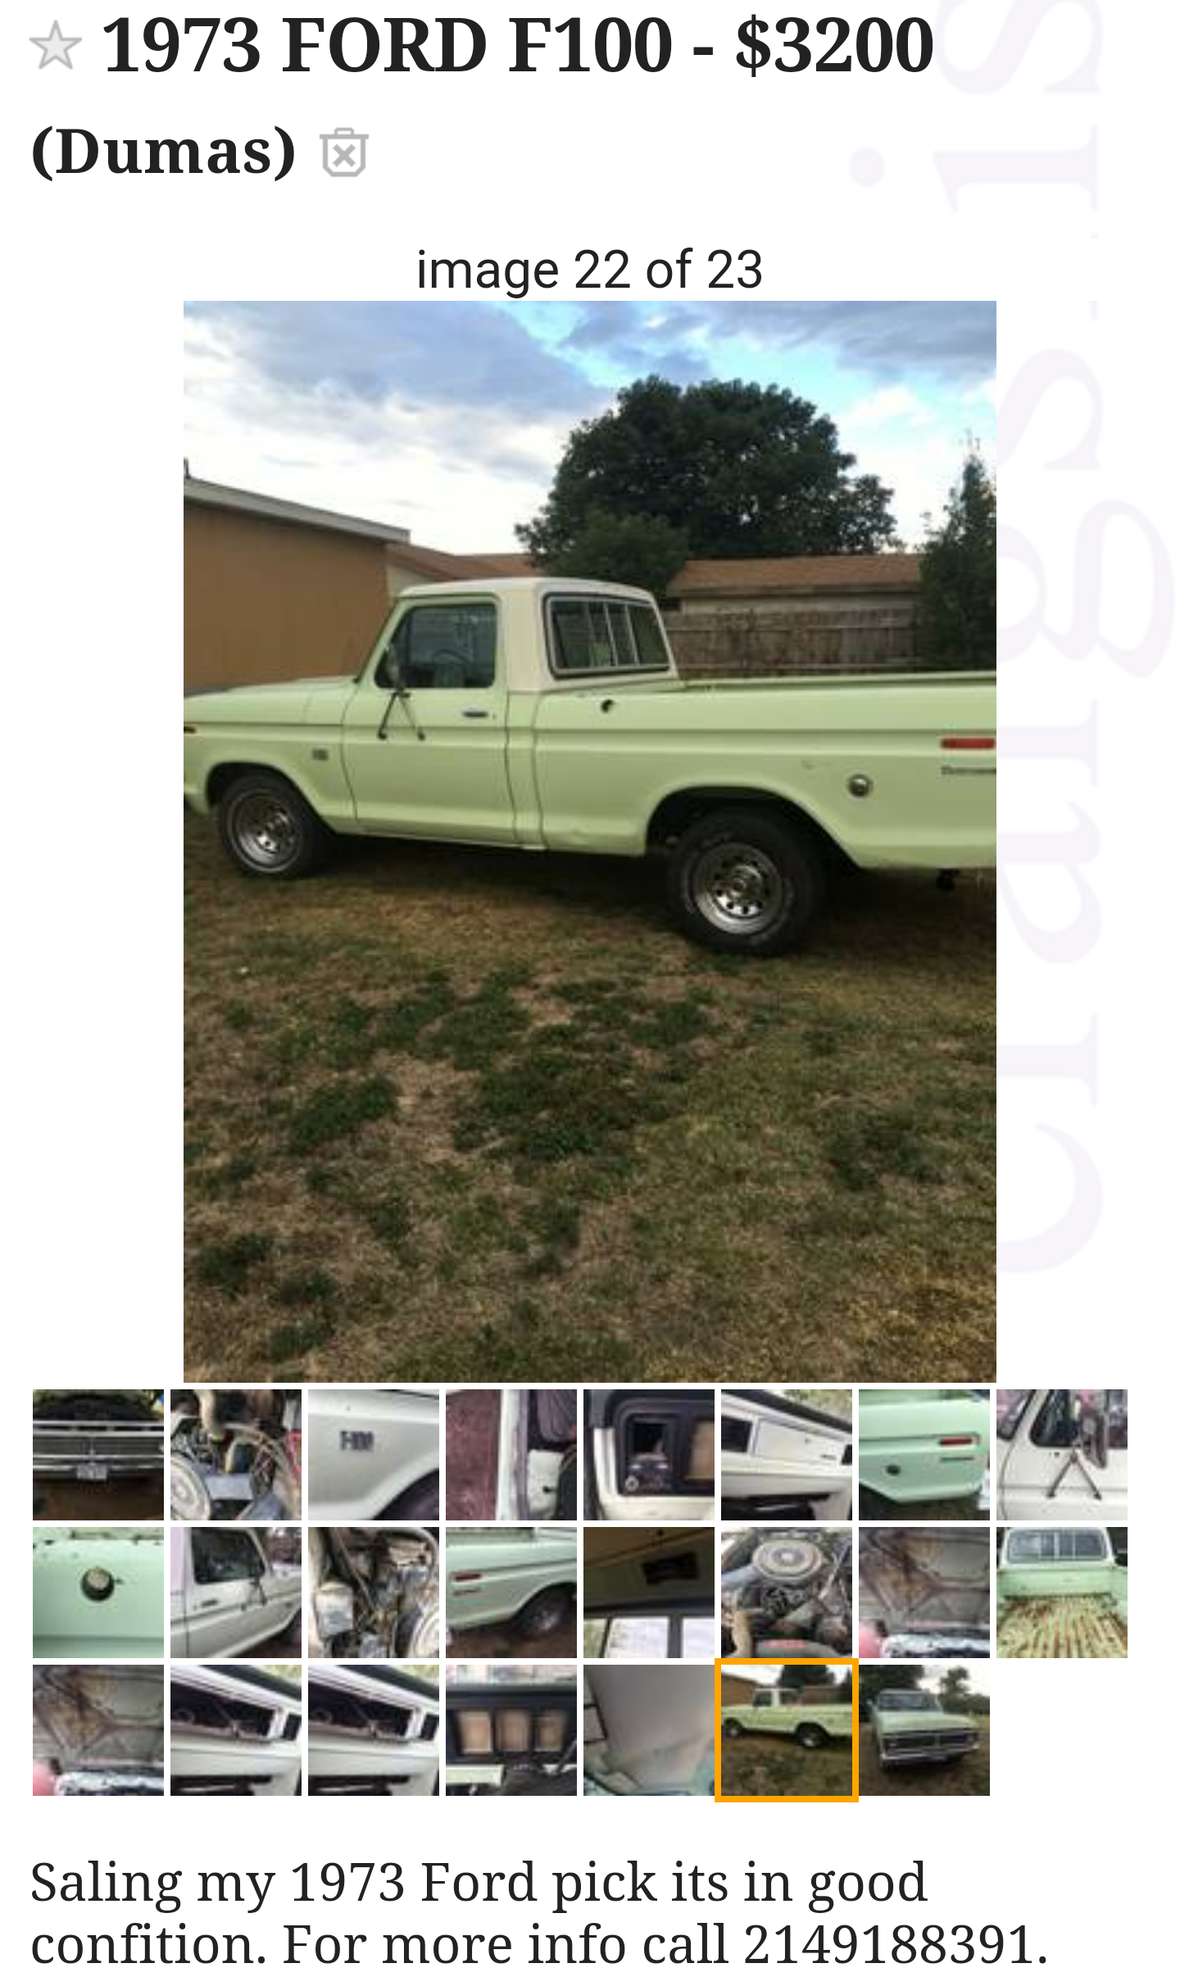 Craigslist find of the week! - Page 143 - Ford Truck ...